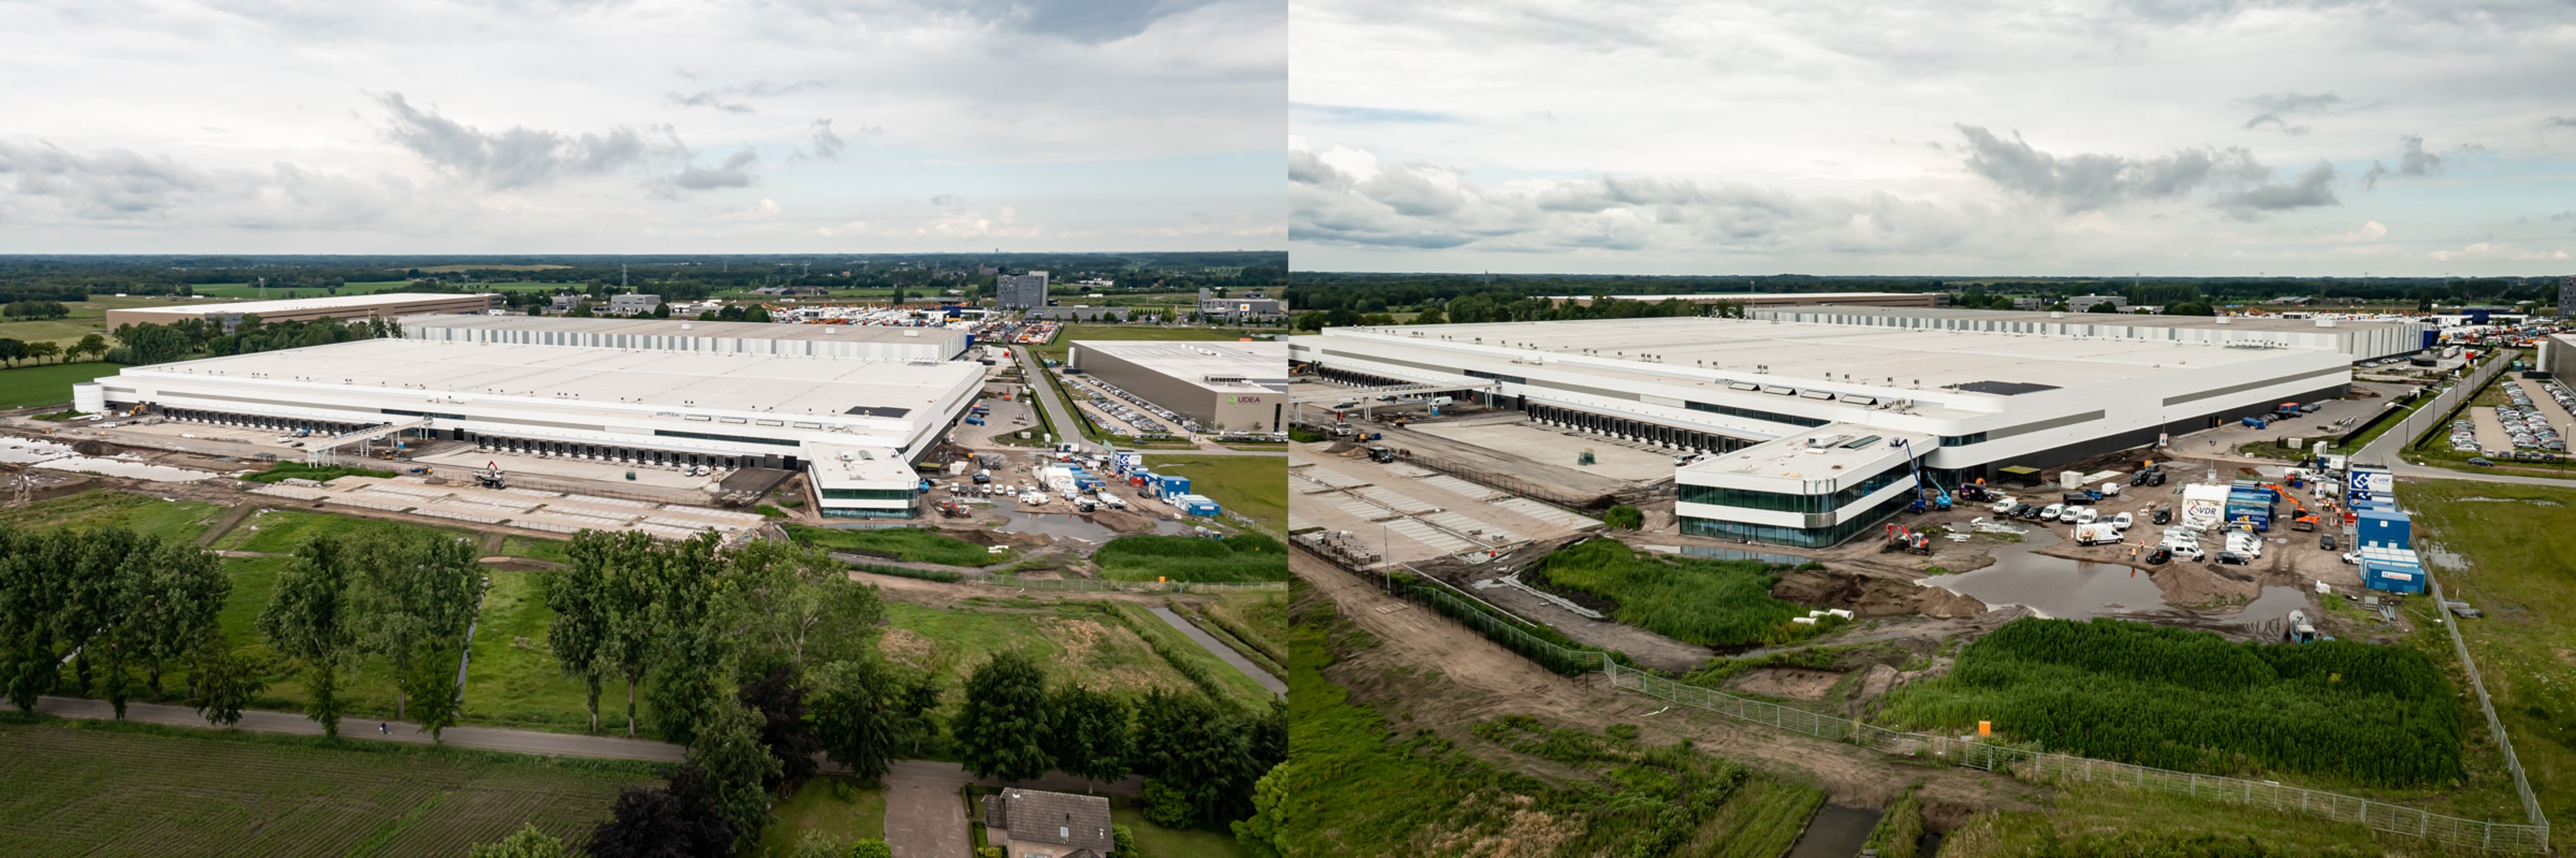 Alliance Healthcare Campus luchtfoto 2